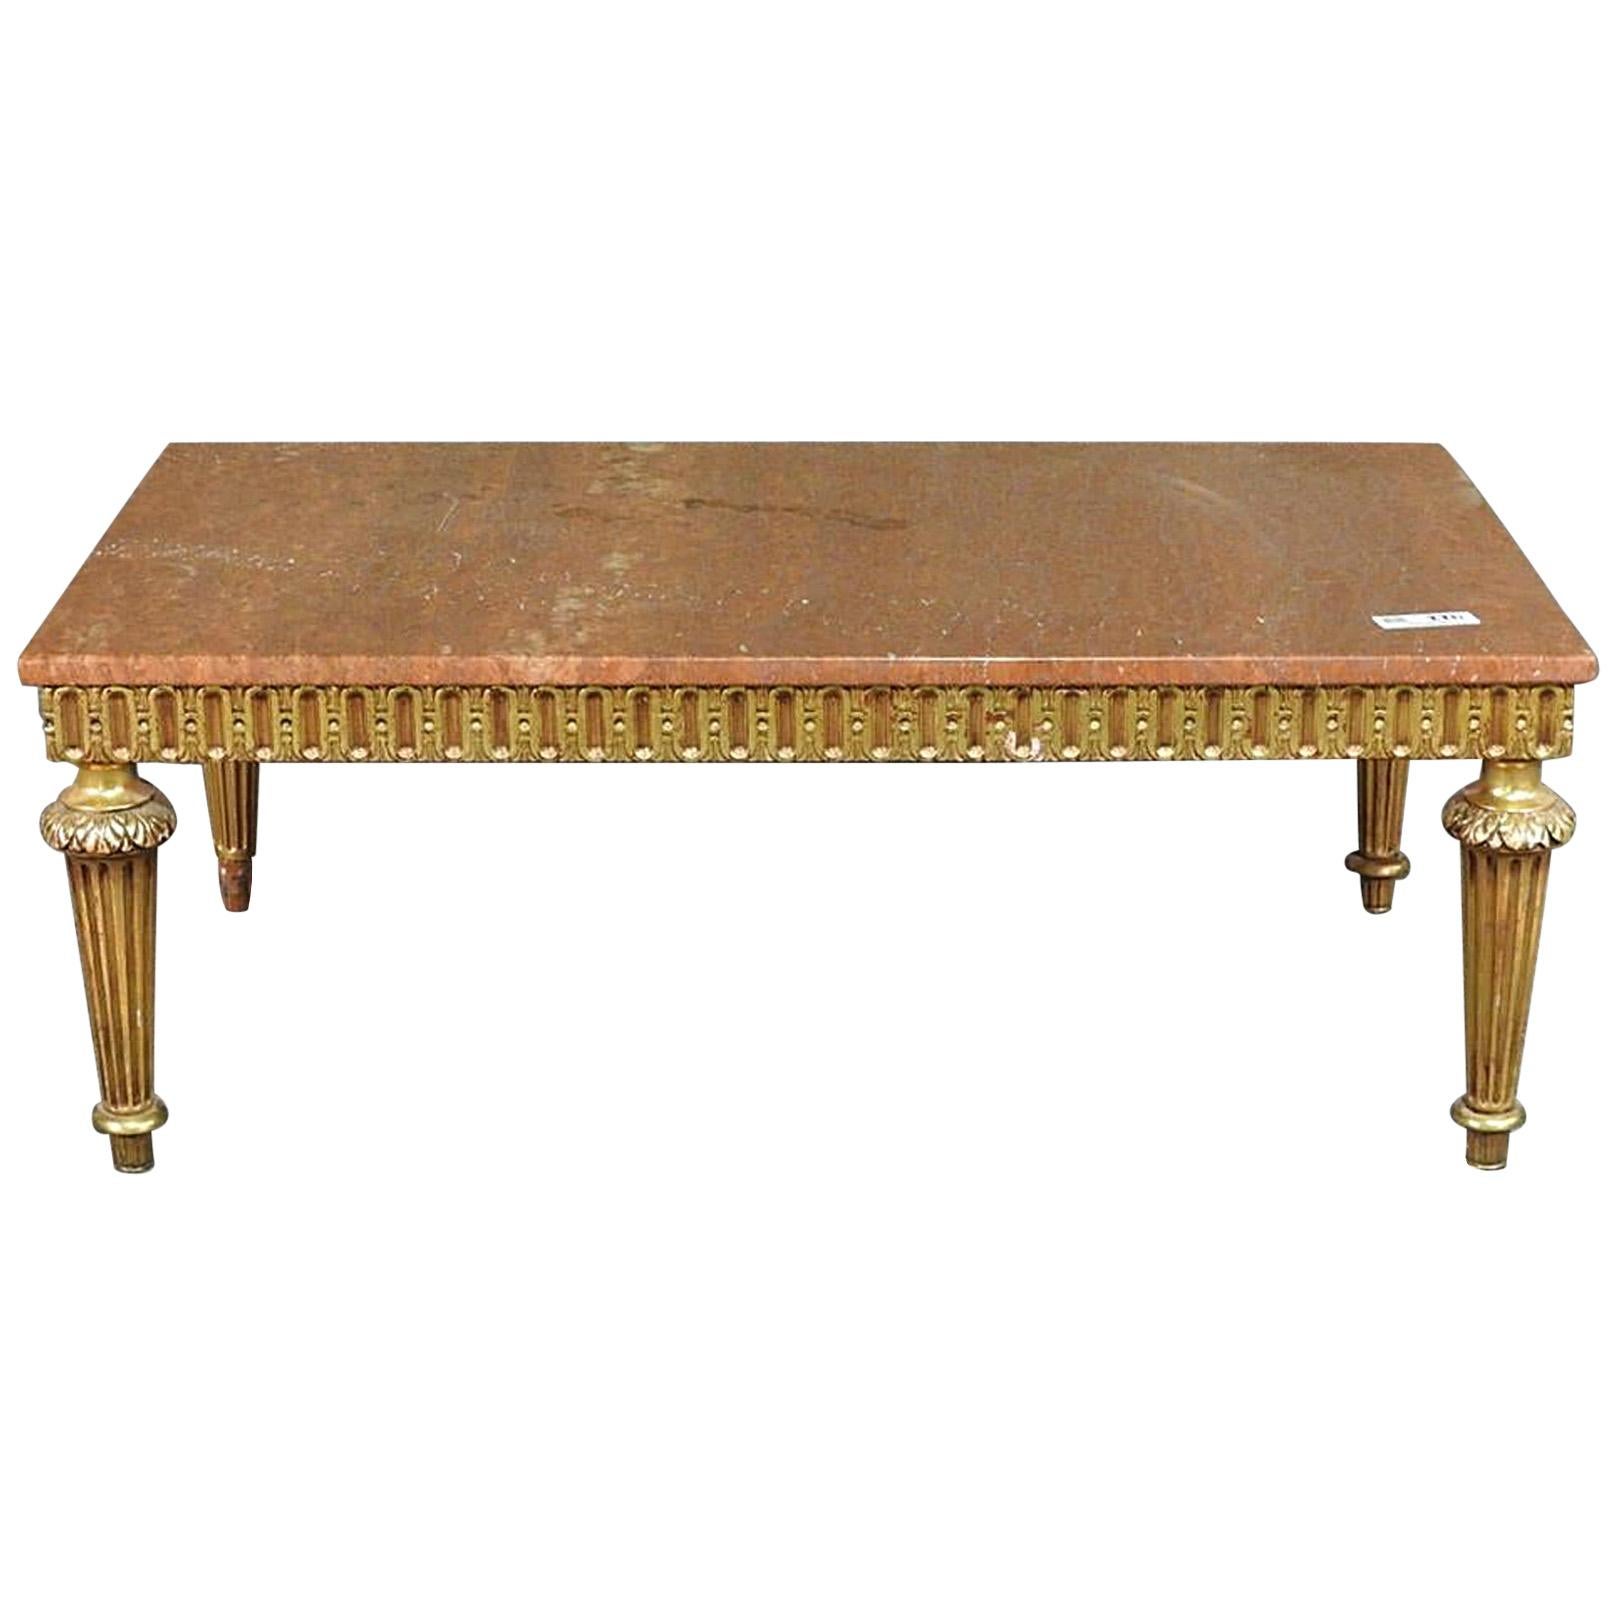 French Louis XVI Gilded Rectangular Rouge Marble Coffee Table, circa 1930